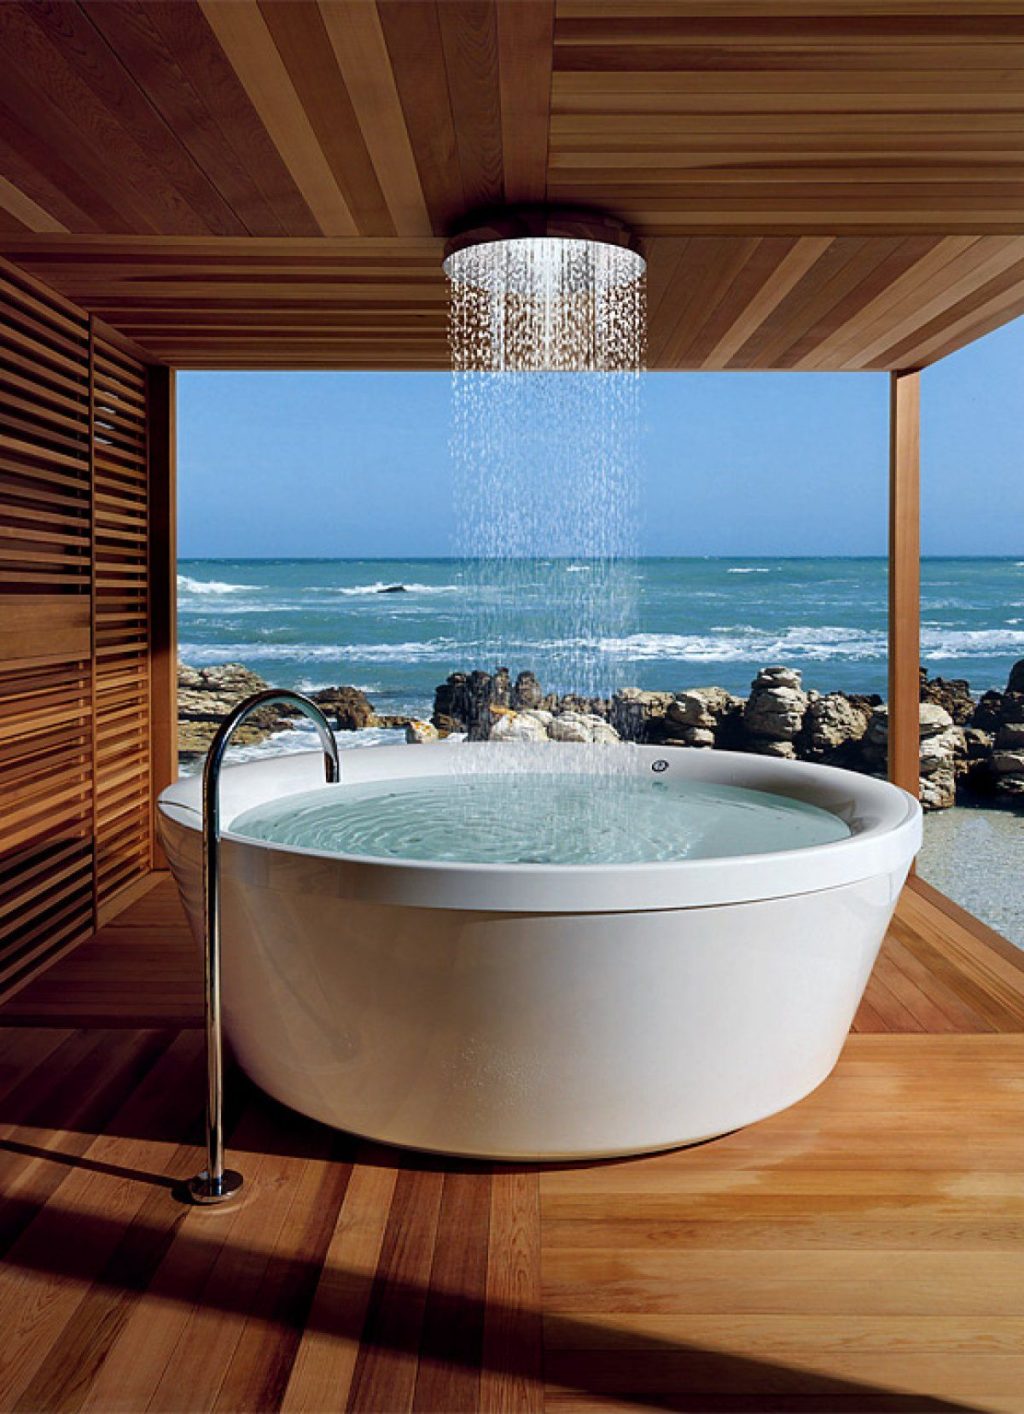 Sea View.. Best +60 Ideas to Enhance Your Bathroom’s Luxuriousness - 57